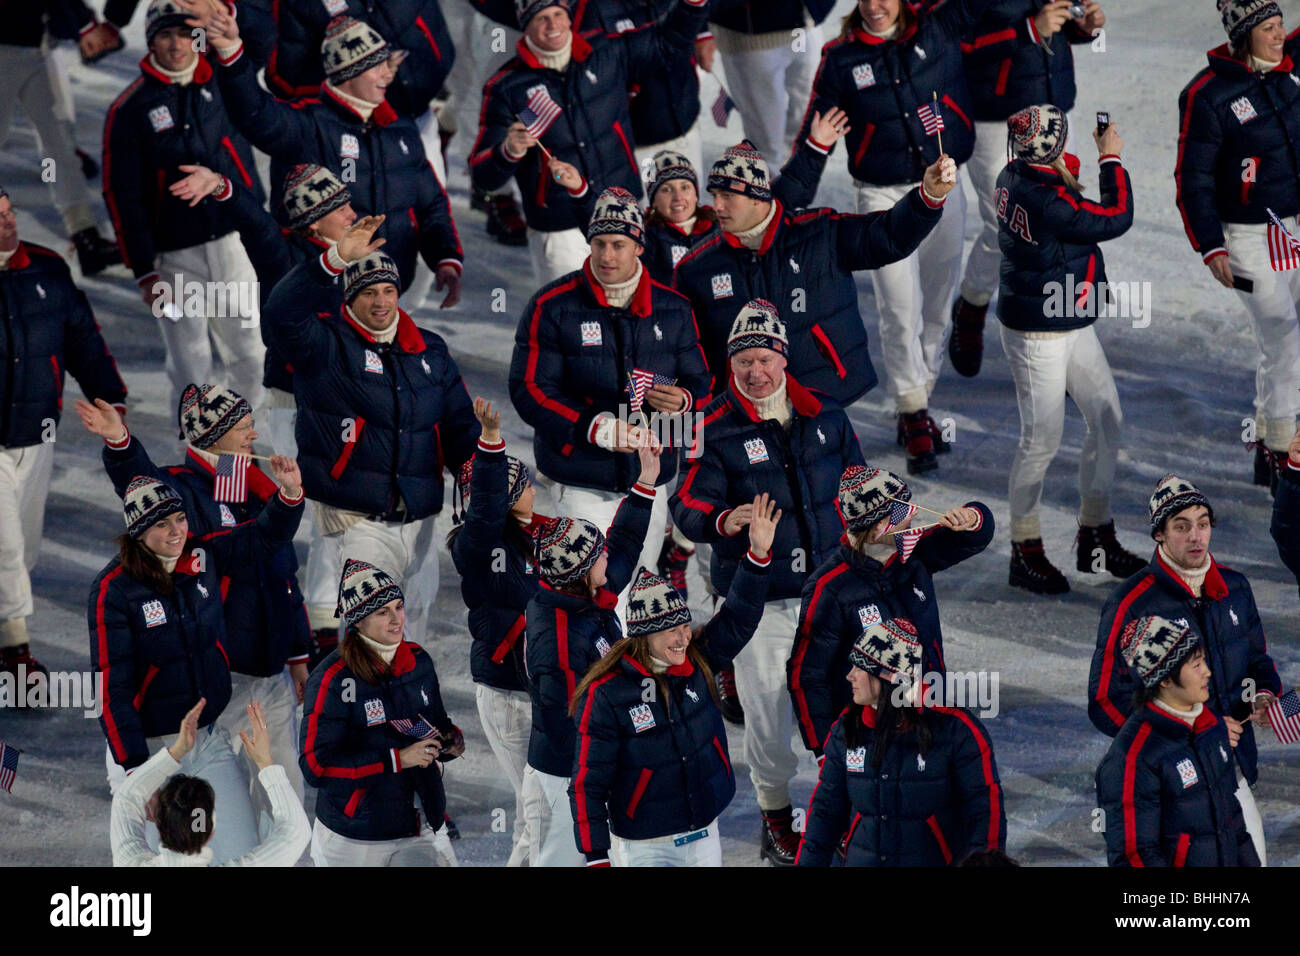 USA athletes marching in at the opening ceremonies of the 2010 Olympic Winter games, Vancouver, British Columbia. Stock Photo